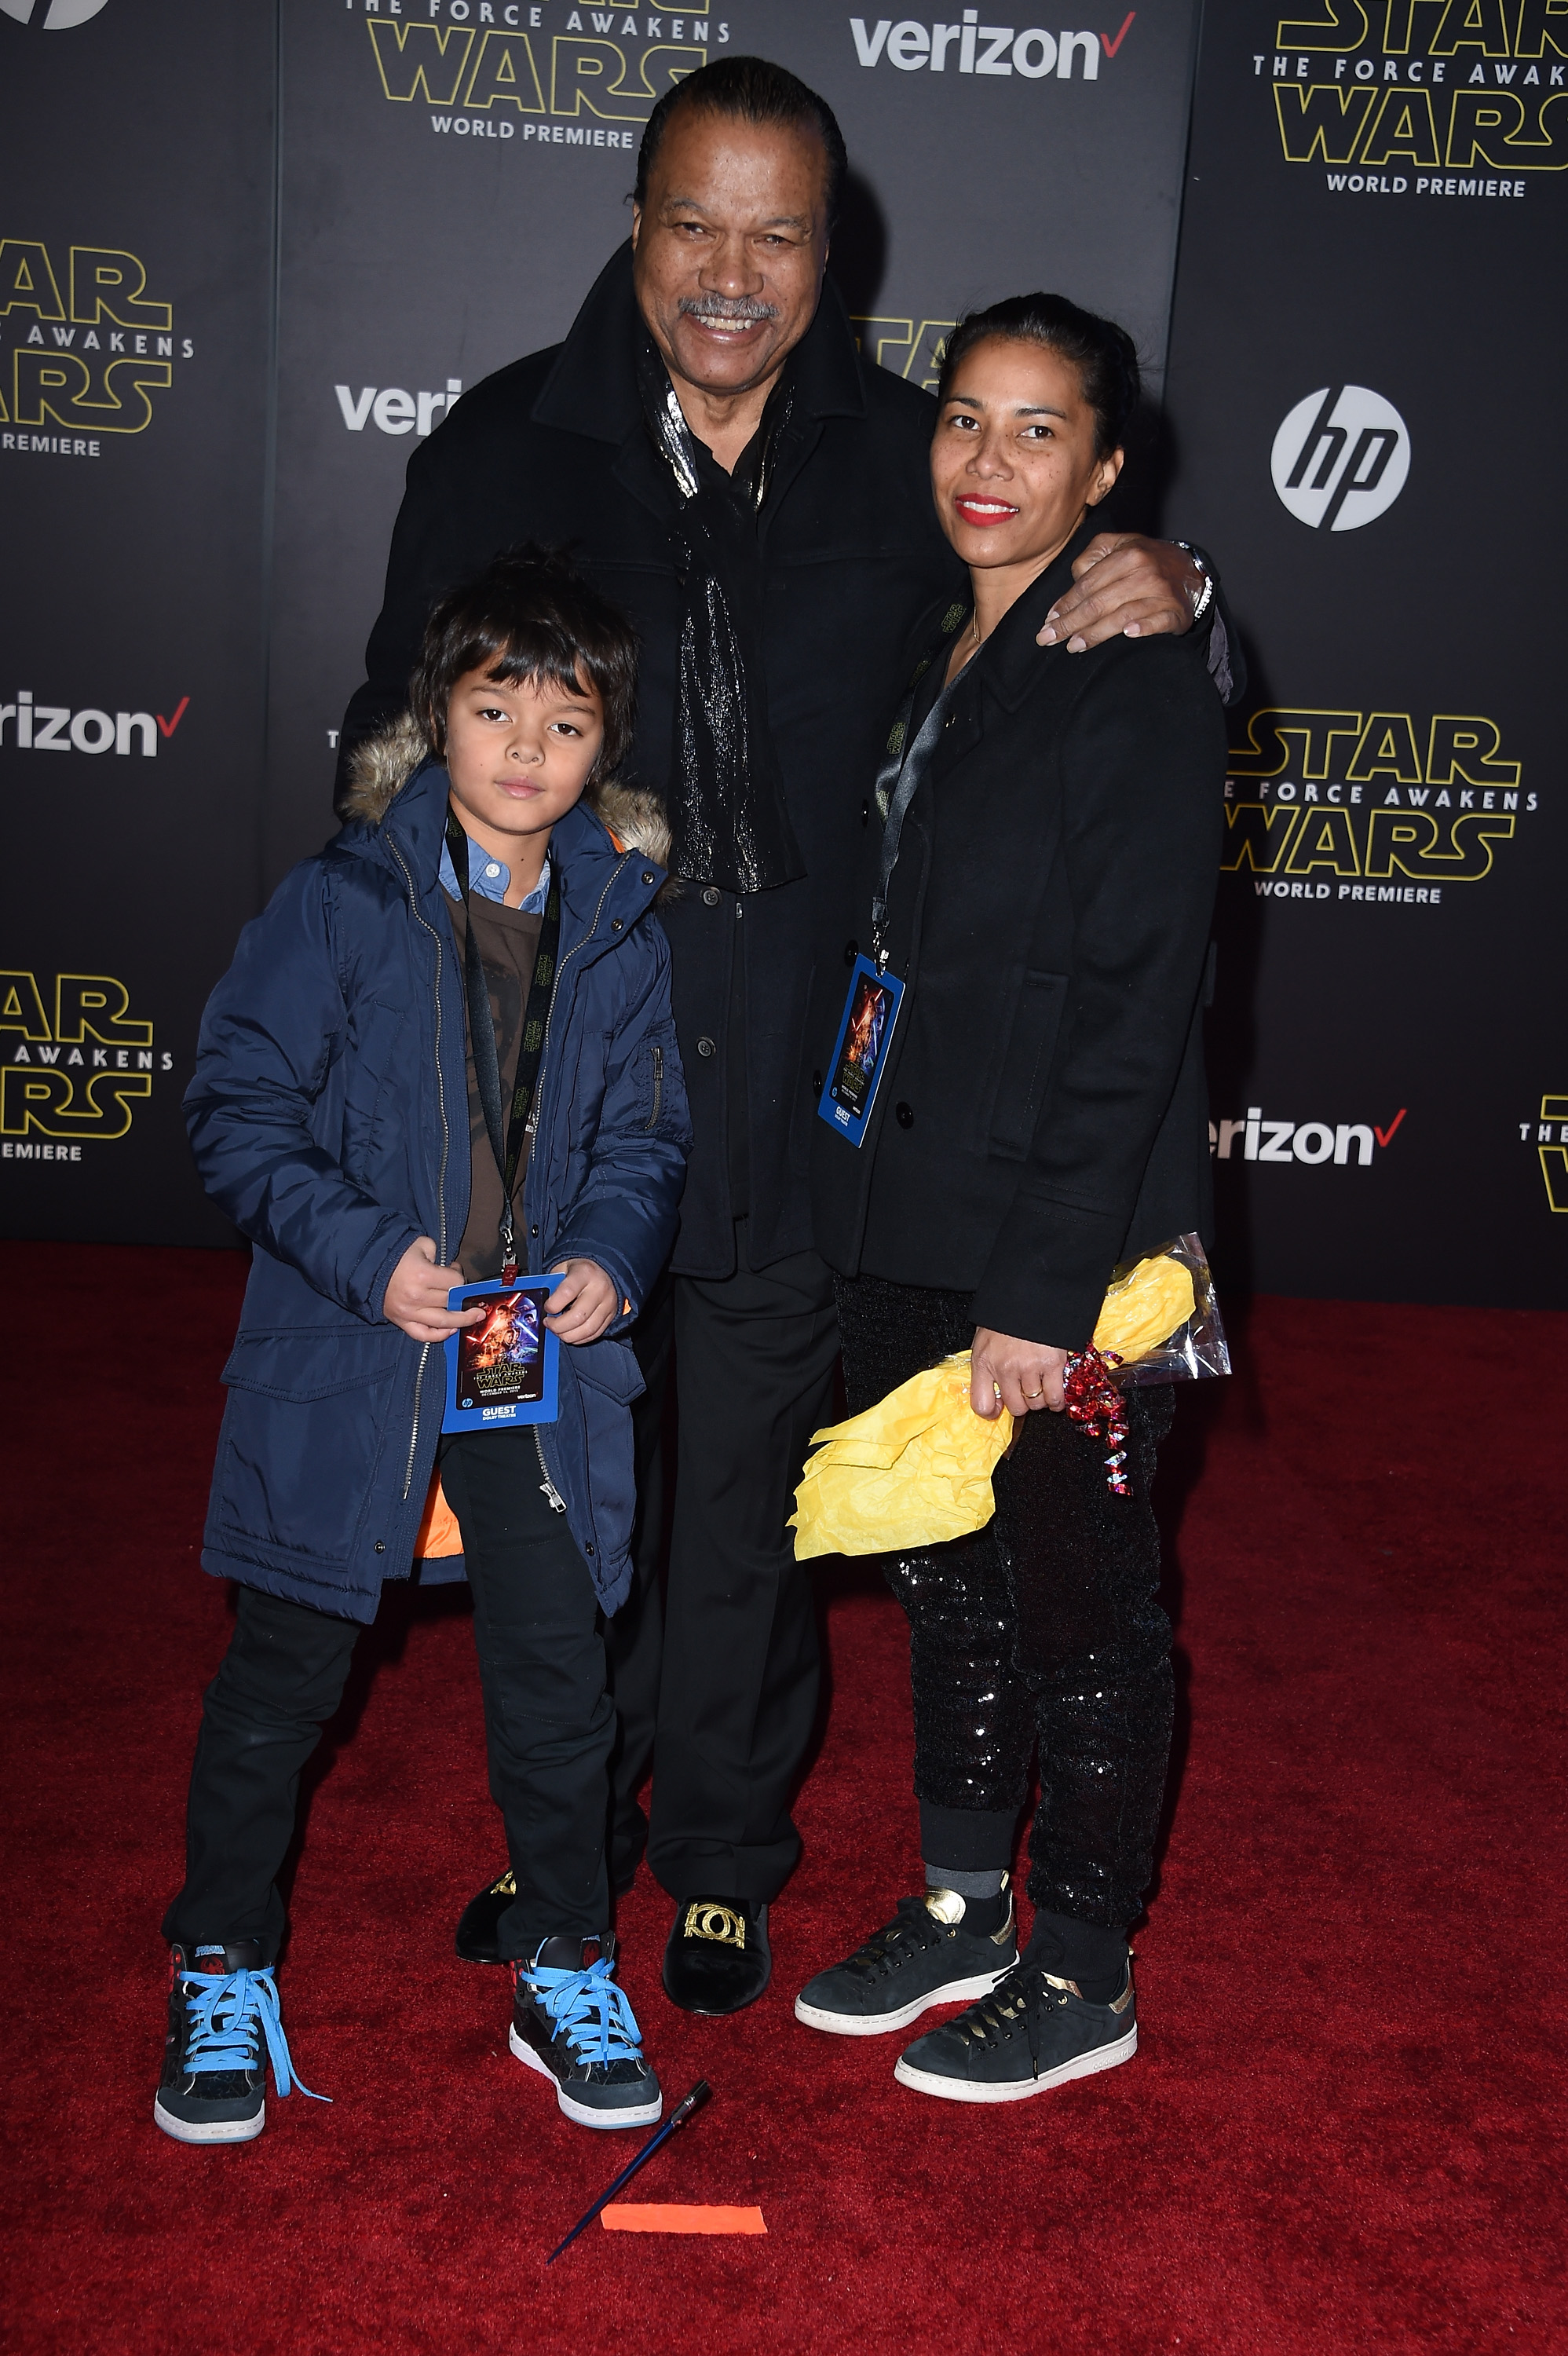 Billy Dee Williams, Teruko Nakagami, and their grandson Finnegan at the premiere "Star Wars: The Force Awakens" on December 14, 2015, in Hollywood, California. | Source: Getty Images